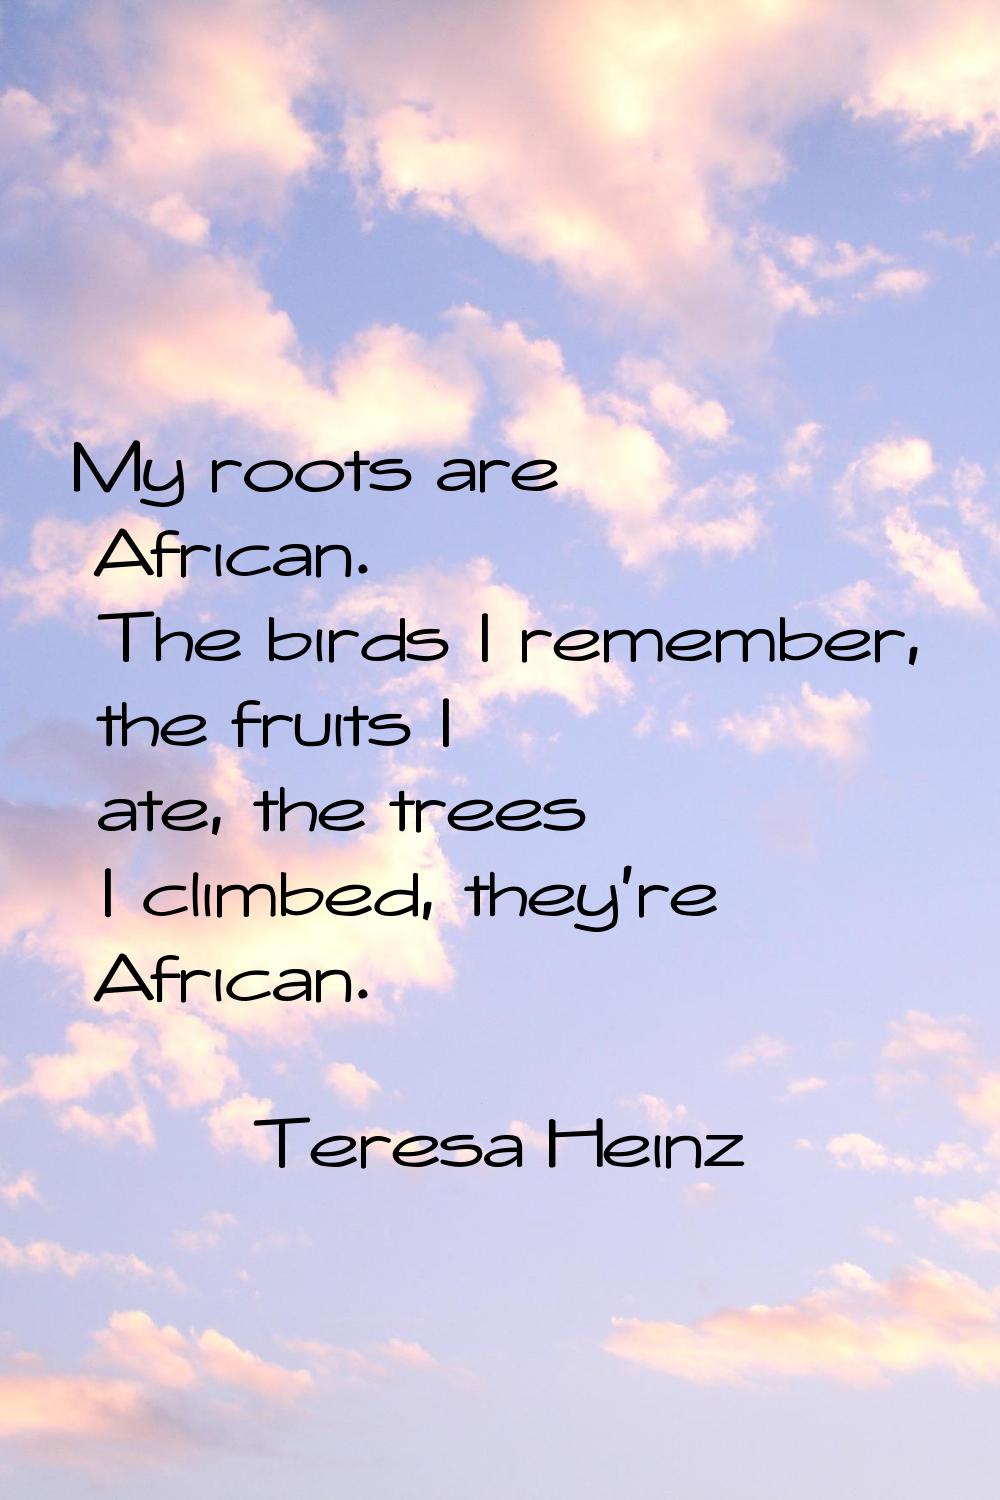 My roots are African. The birds I remember, the fruits I ate, the trees I climbed, they're African.